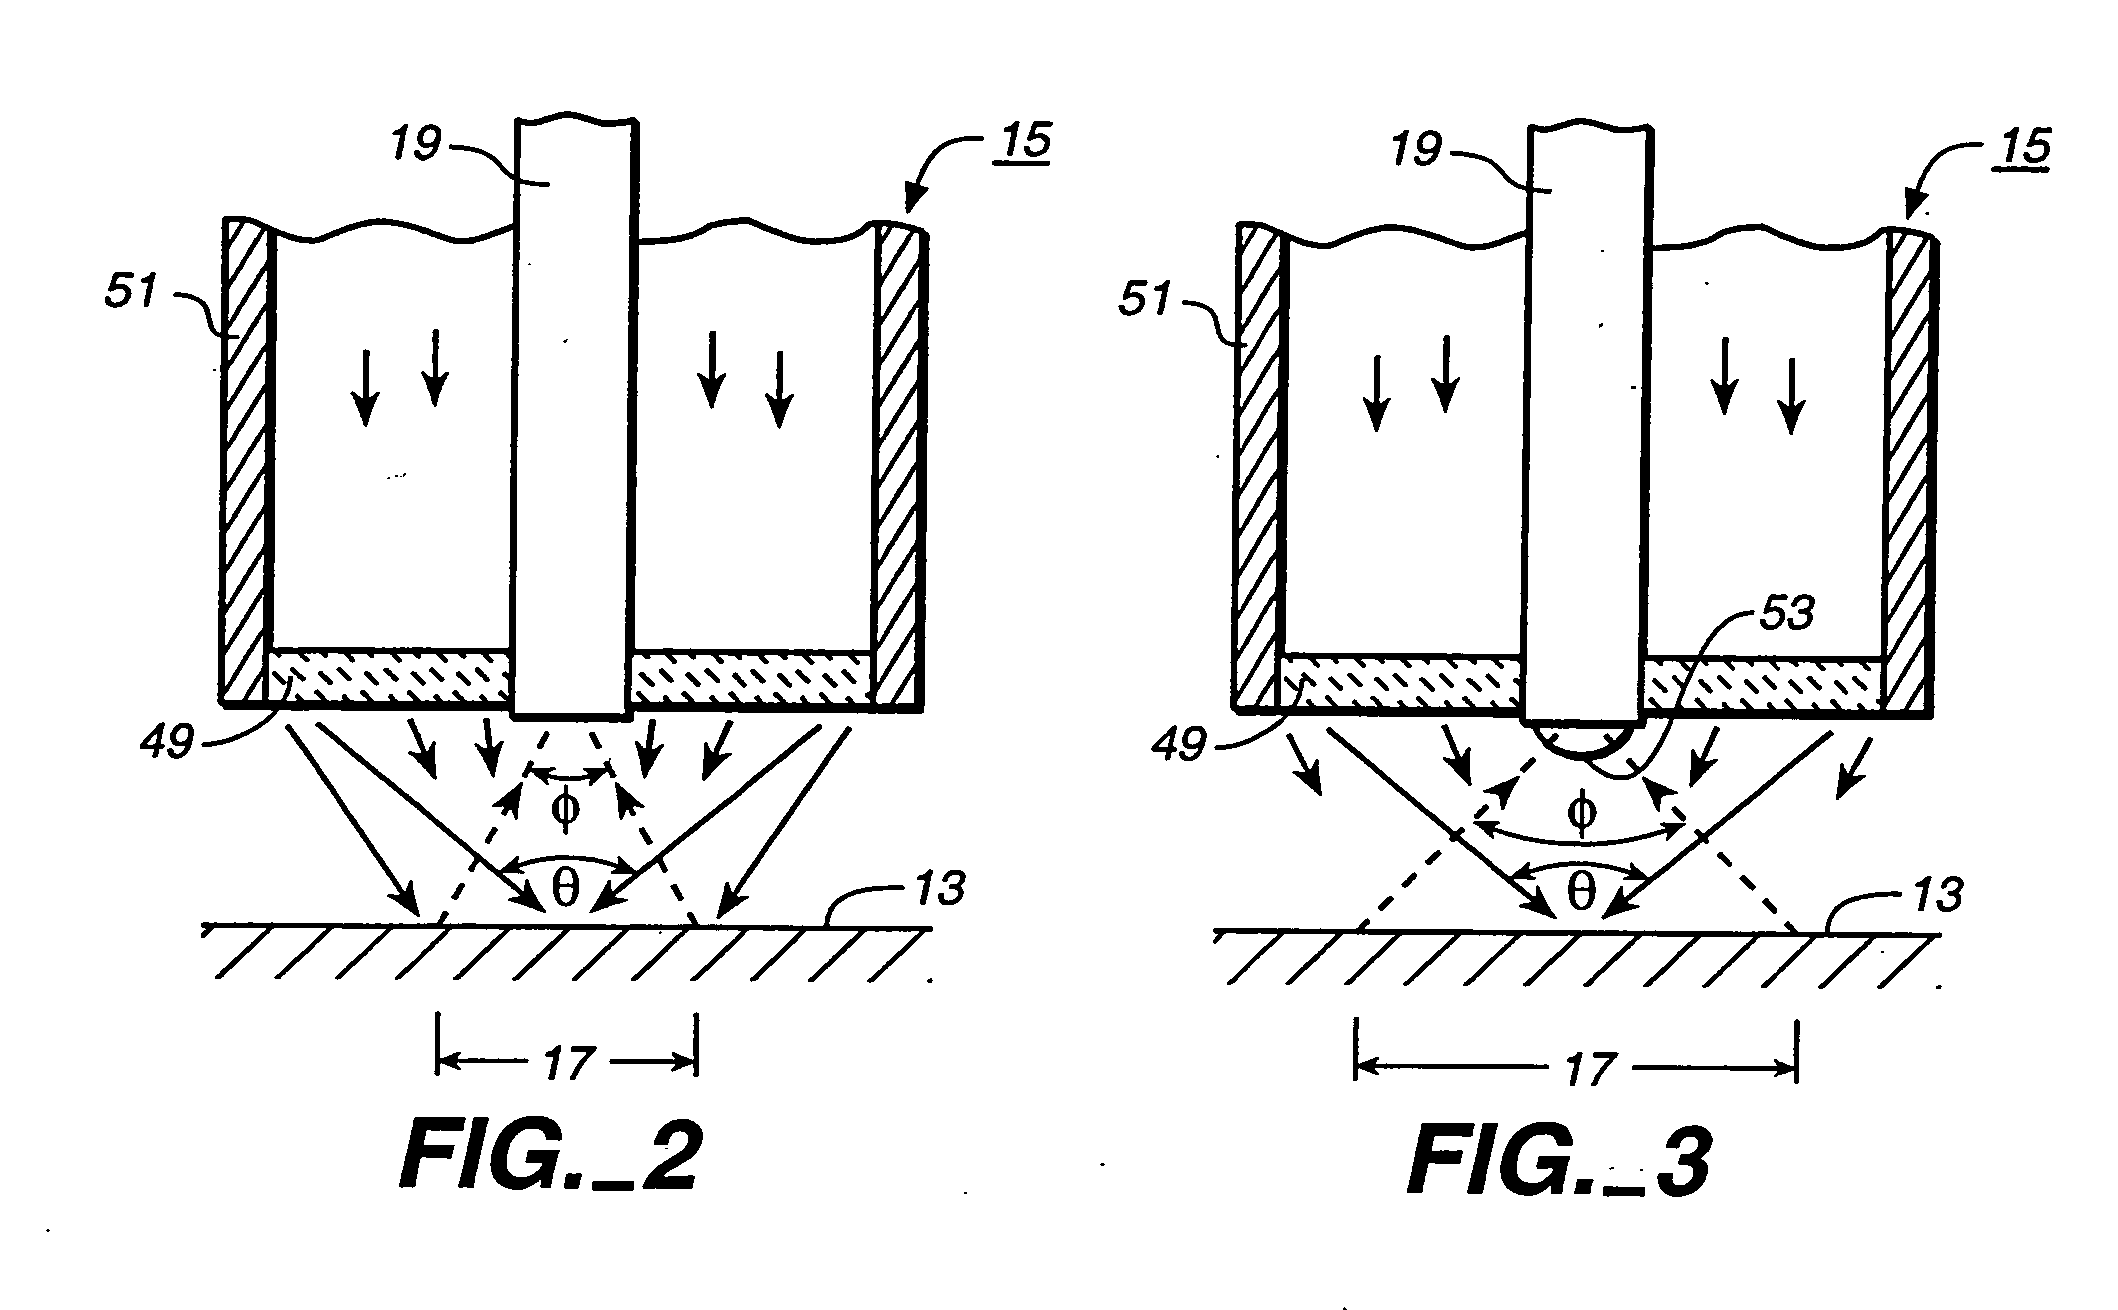 Optical techniques for measuring layer thicknesses and other surface characteristics of objects such as semiconductor wafers